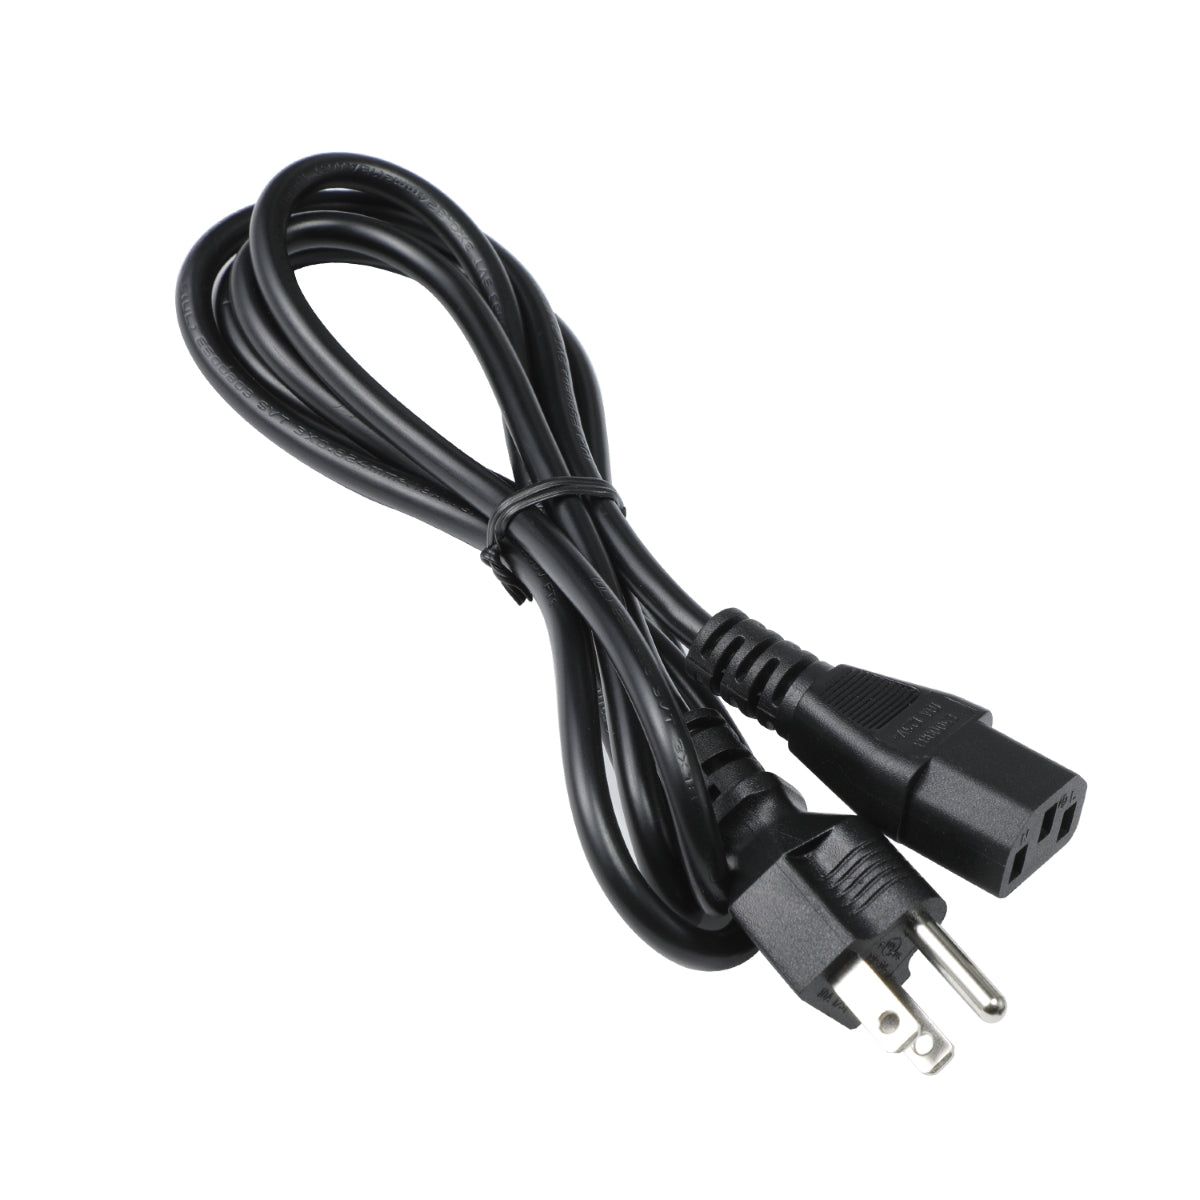 LG 43UD79-B TV Power Cable